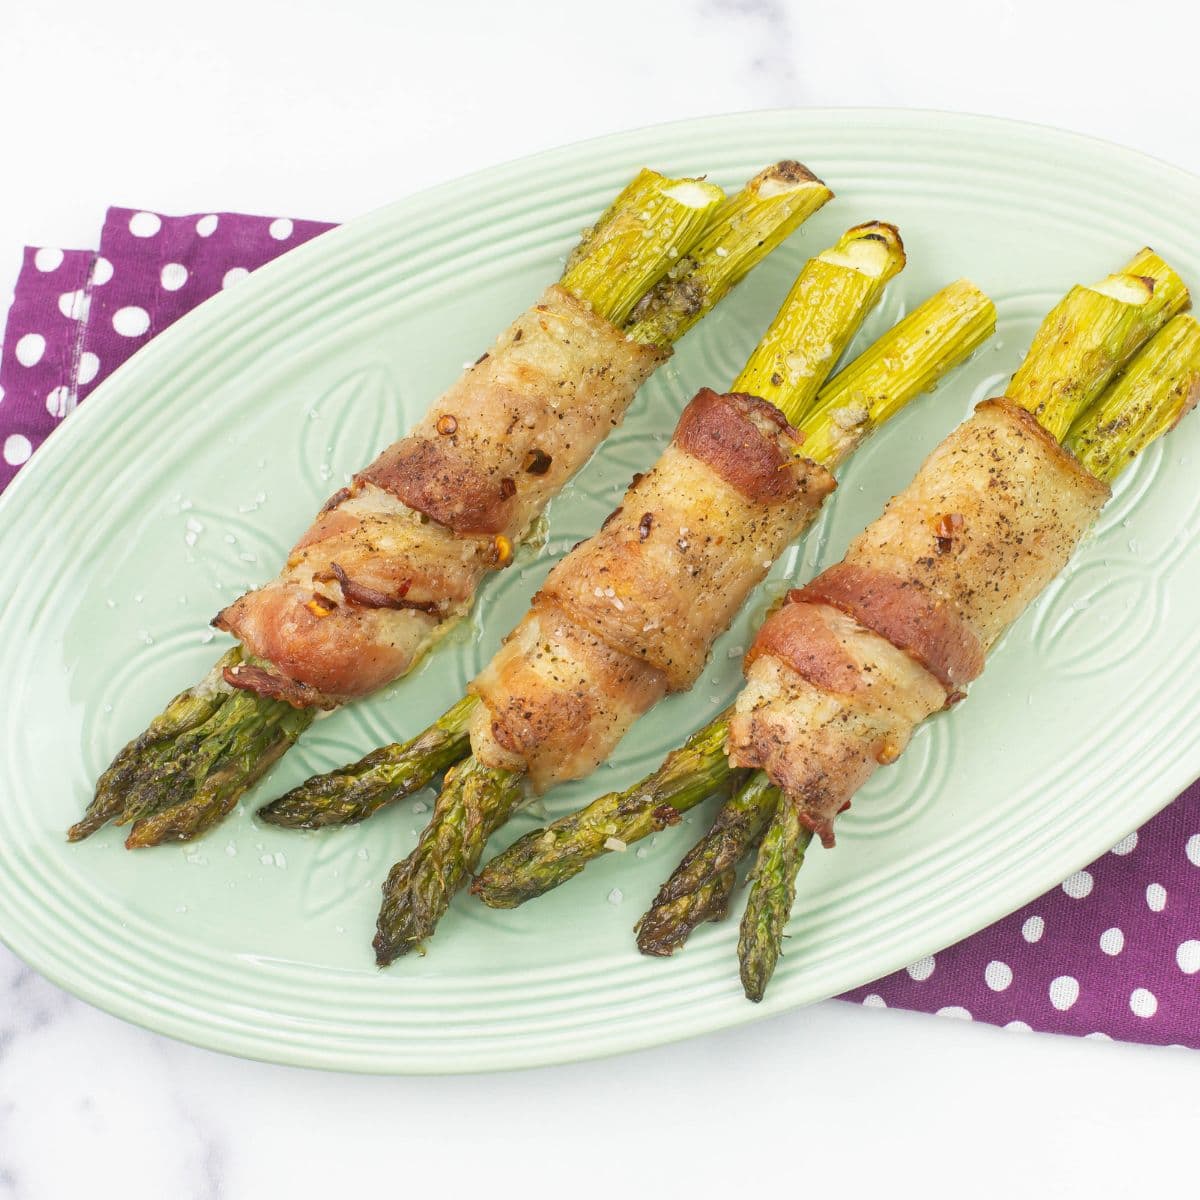 Three bacon wrapped asparagus bundles on a pale green serving plate.